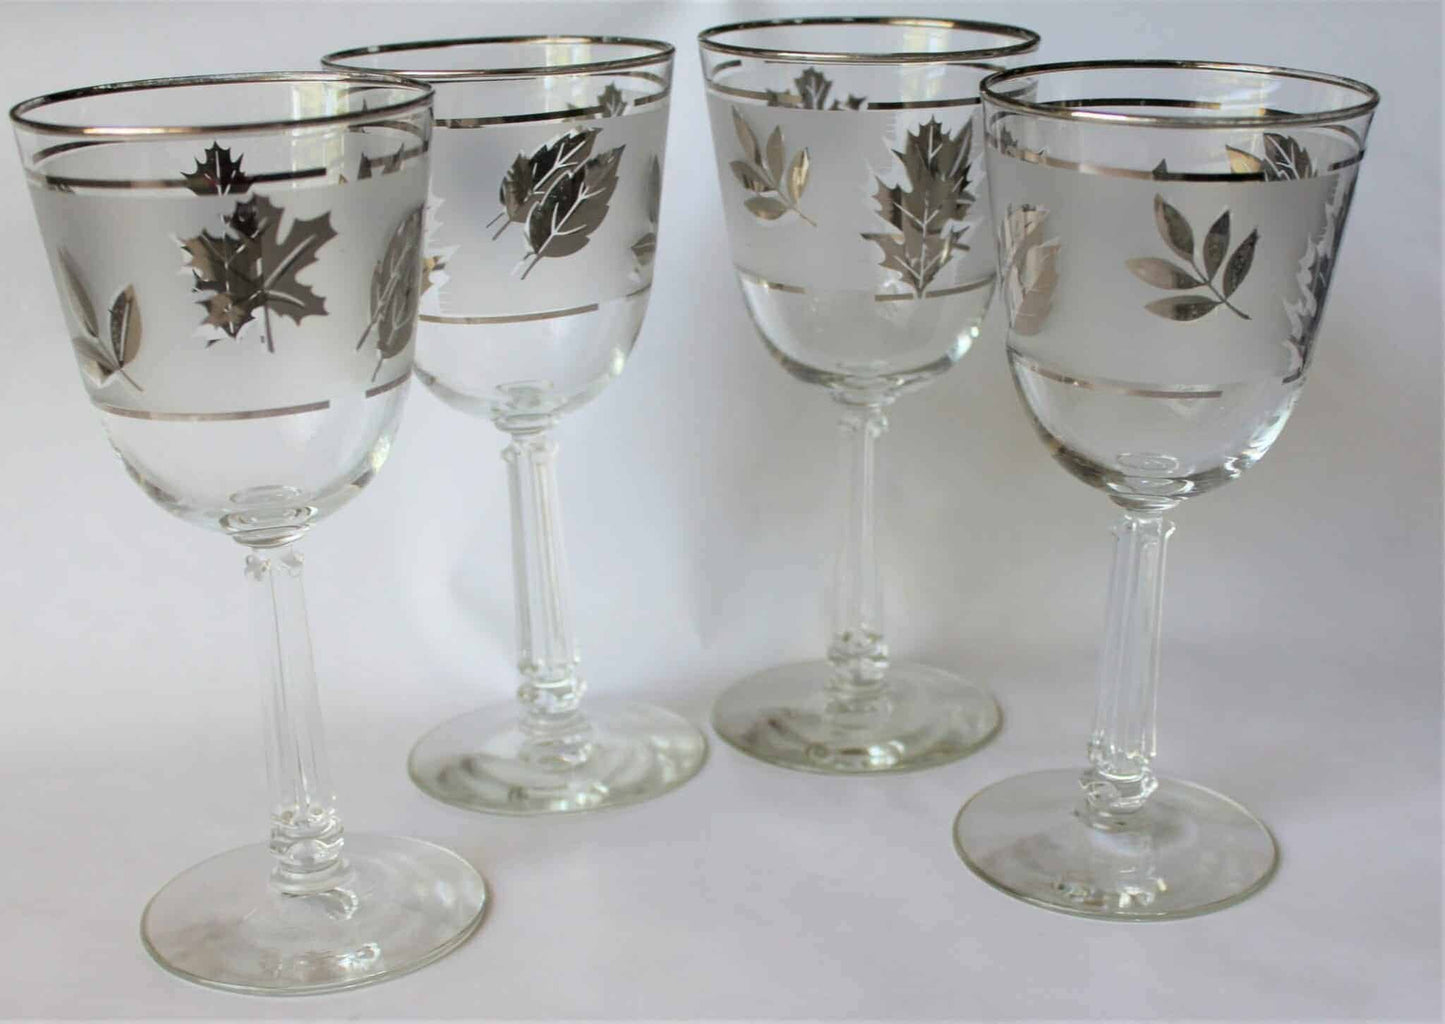 Wine Glasses, Libbey Silver Foliage, Mid-Century Modern, Set of 4, Vintage, SOLD